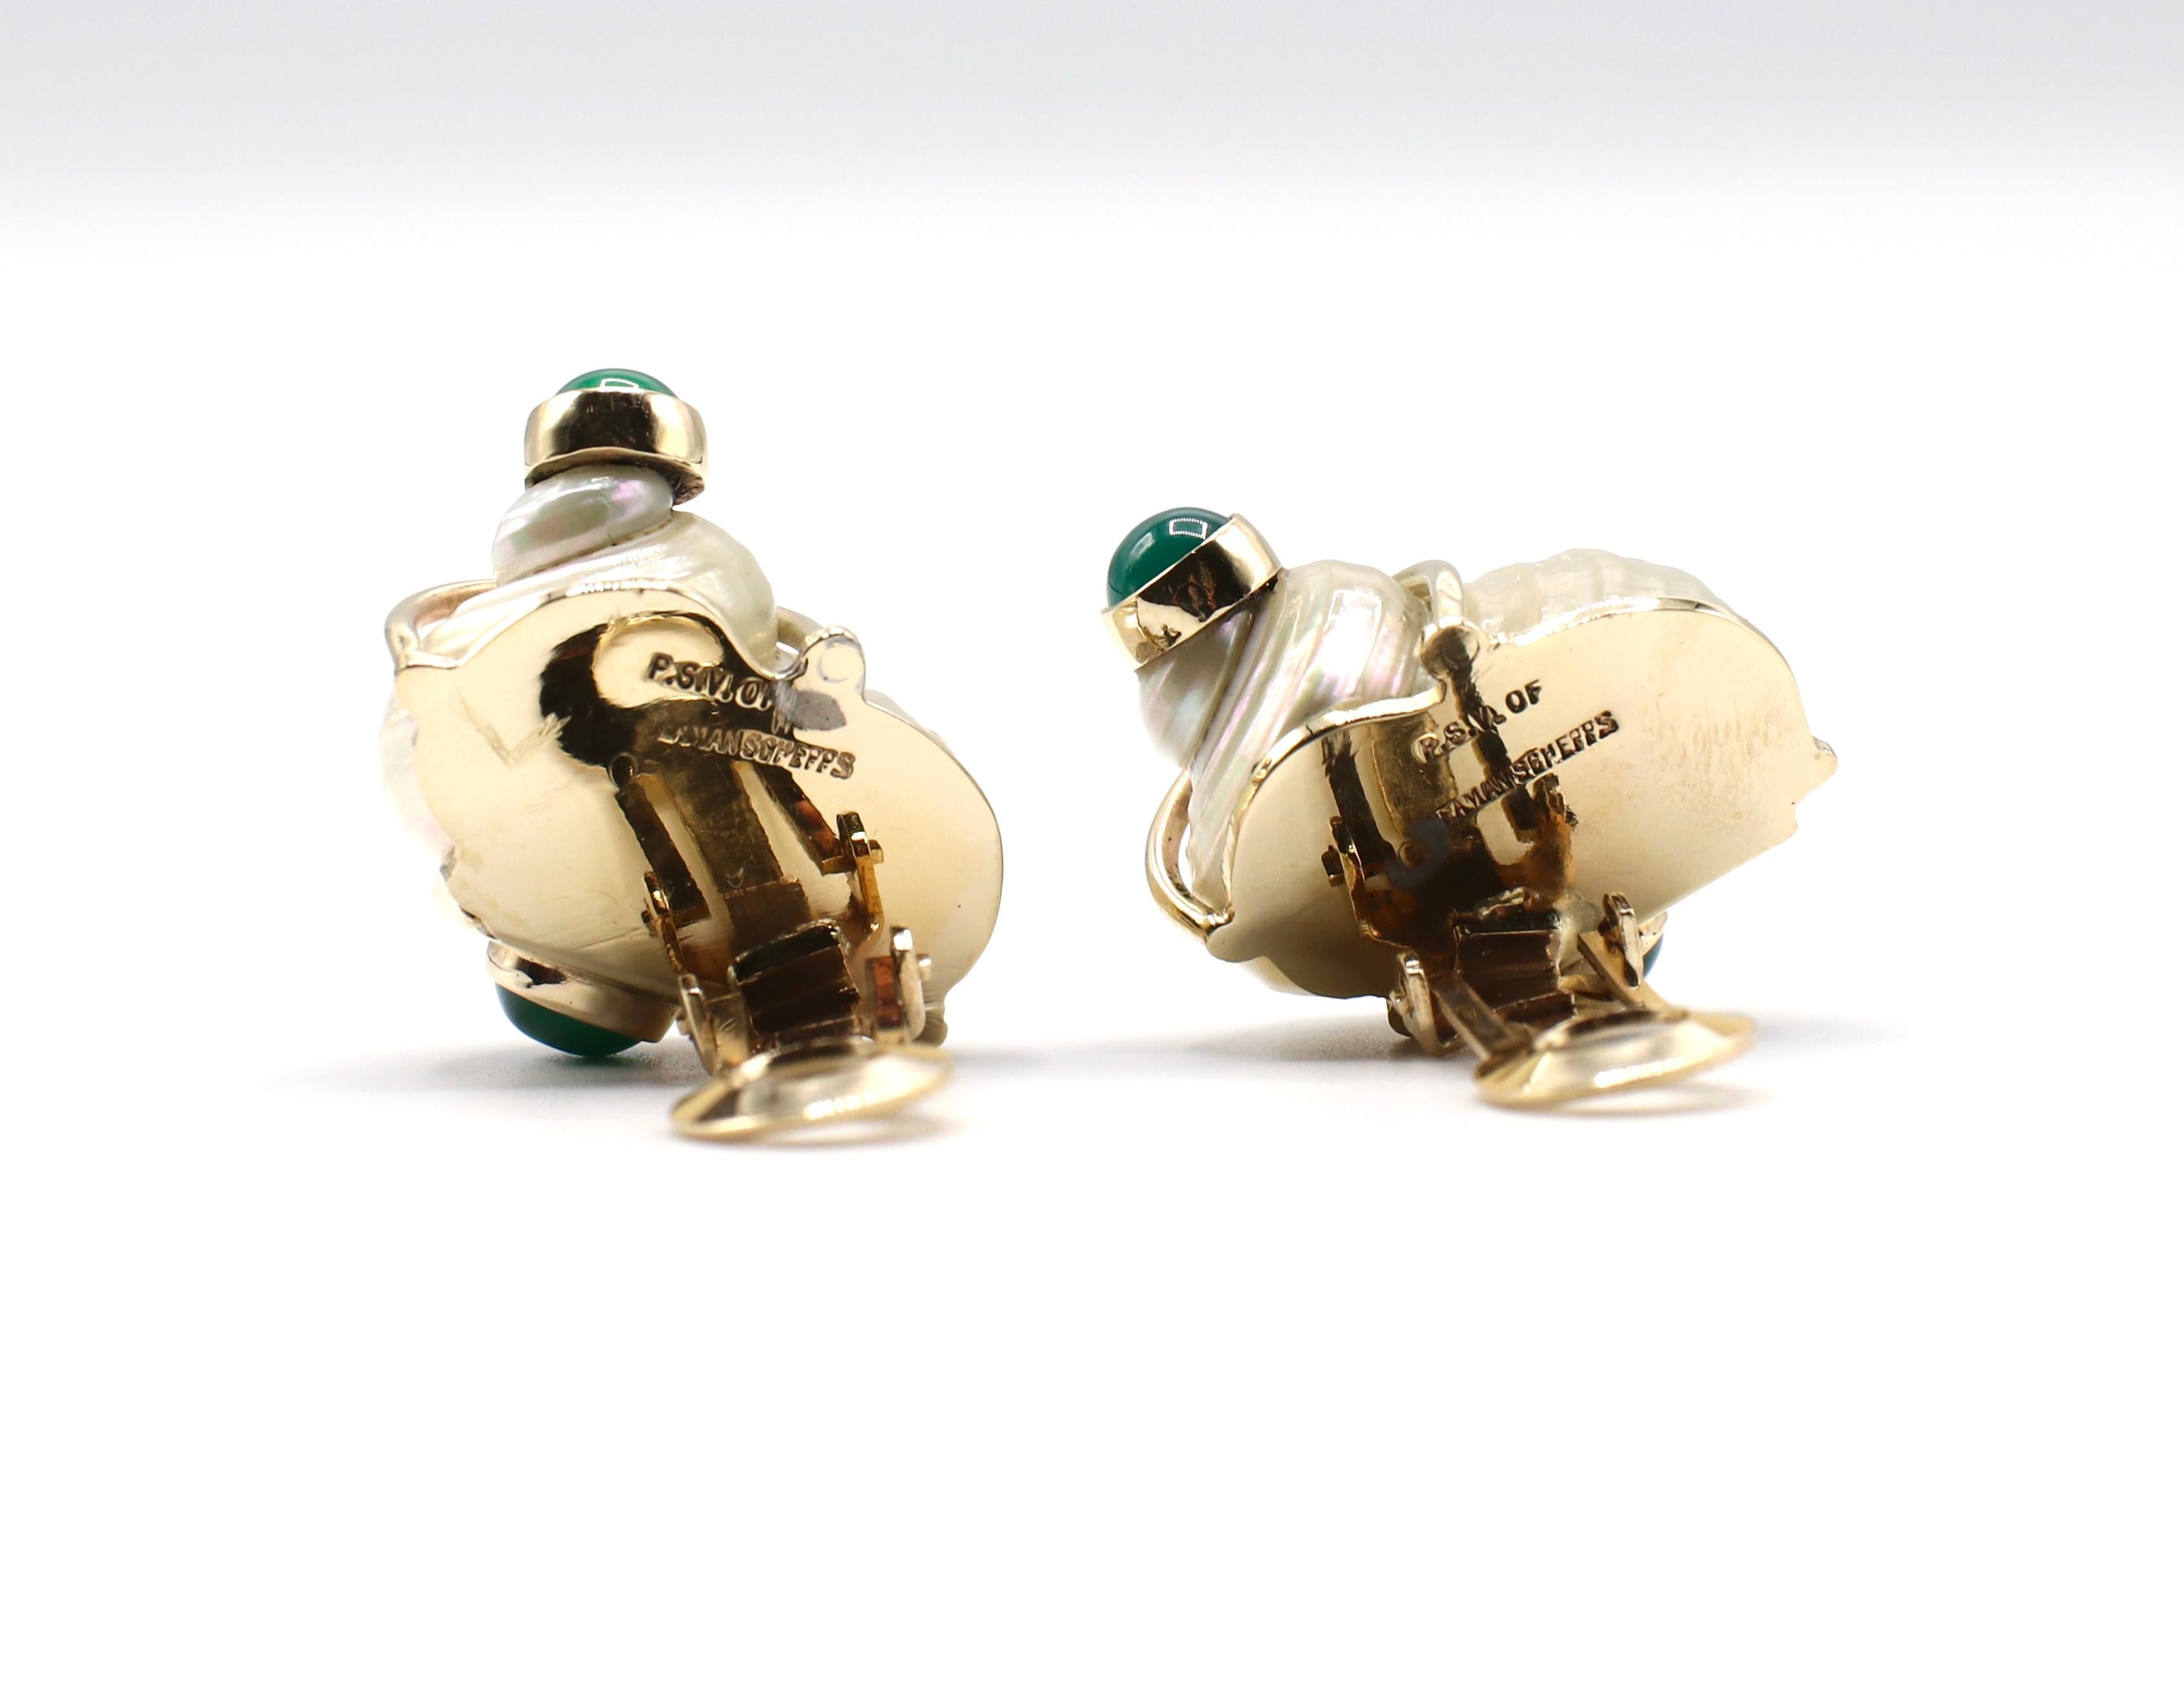 Cabochon Seaman Schepps Turbo Shell Earrings Gold and Green Chalcedony